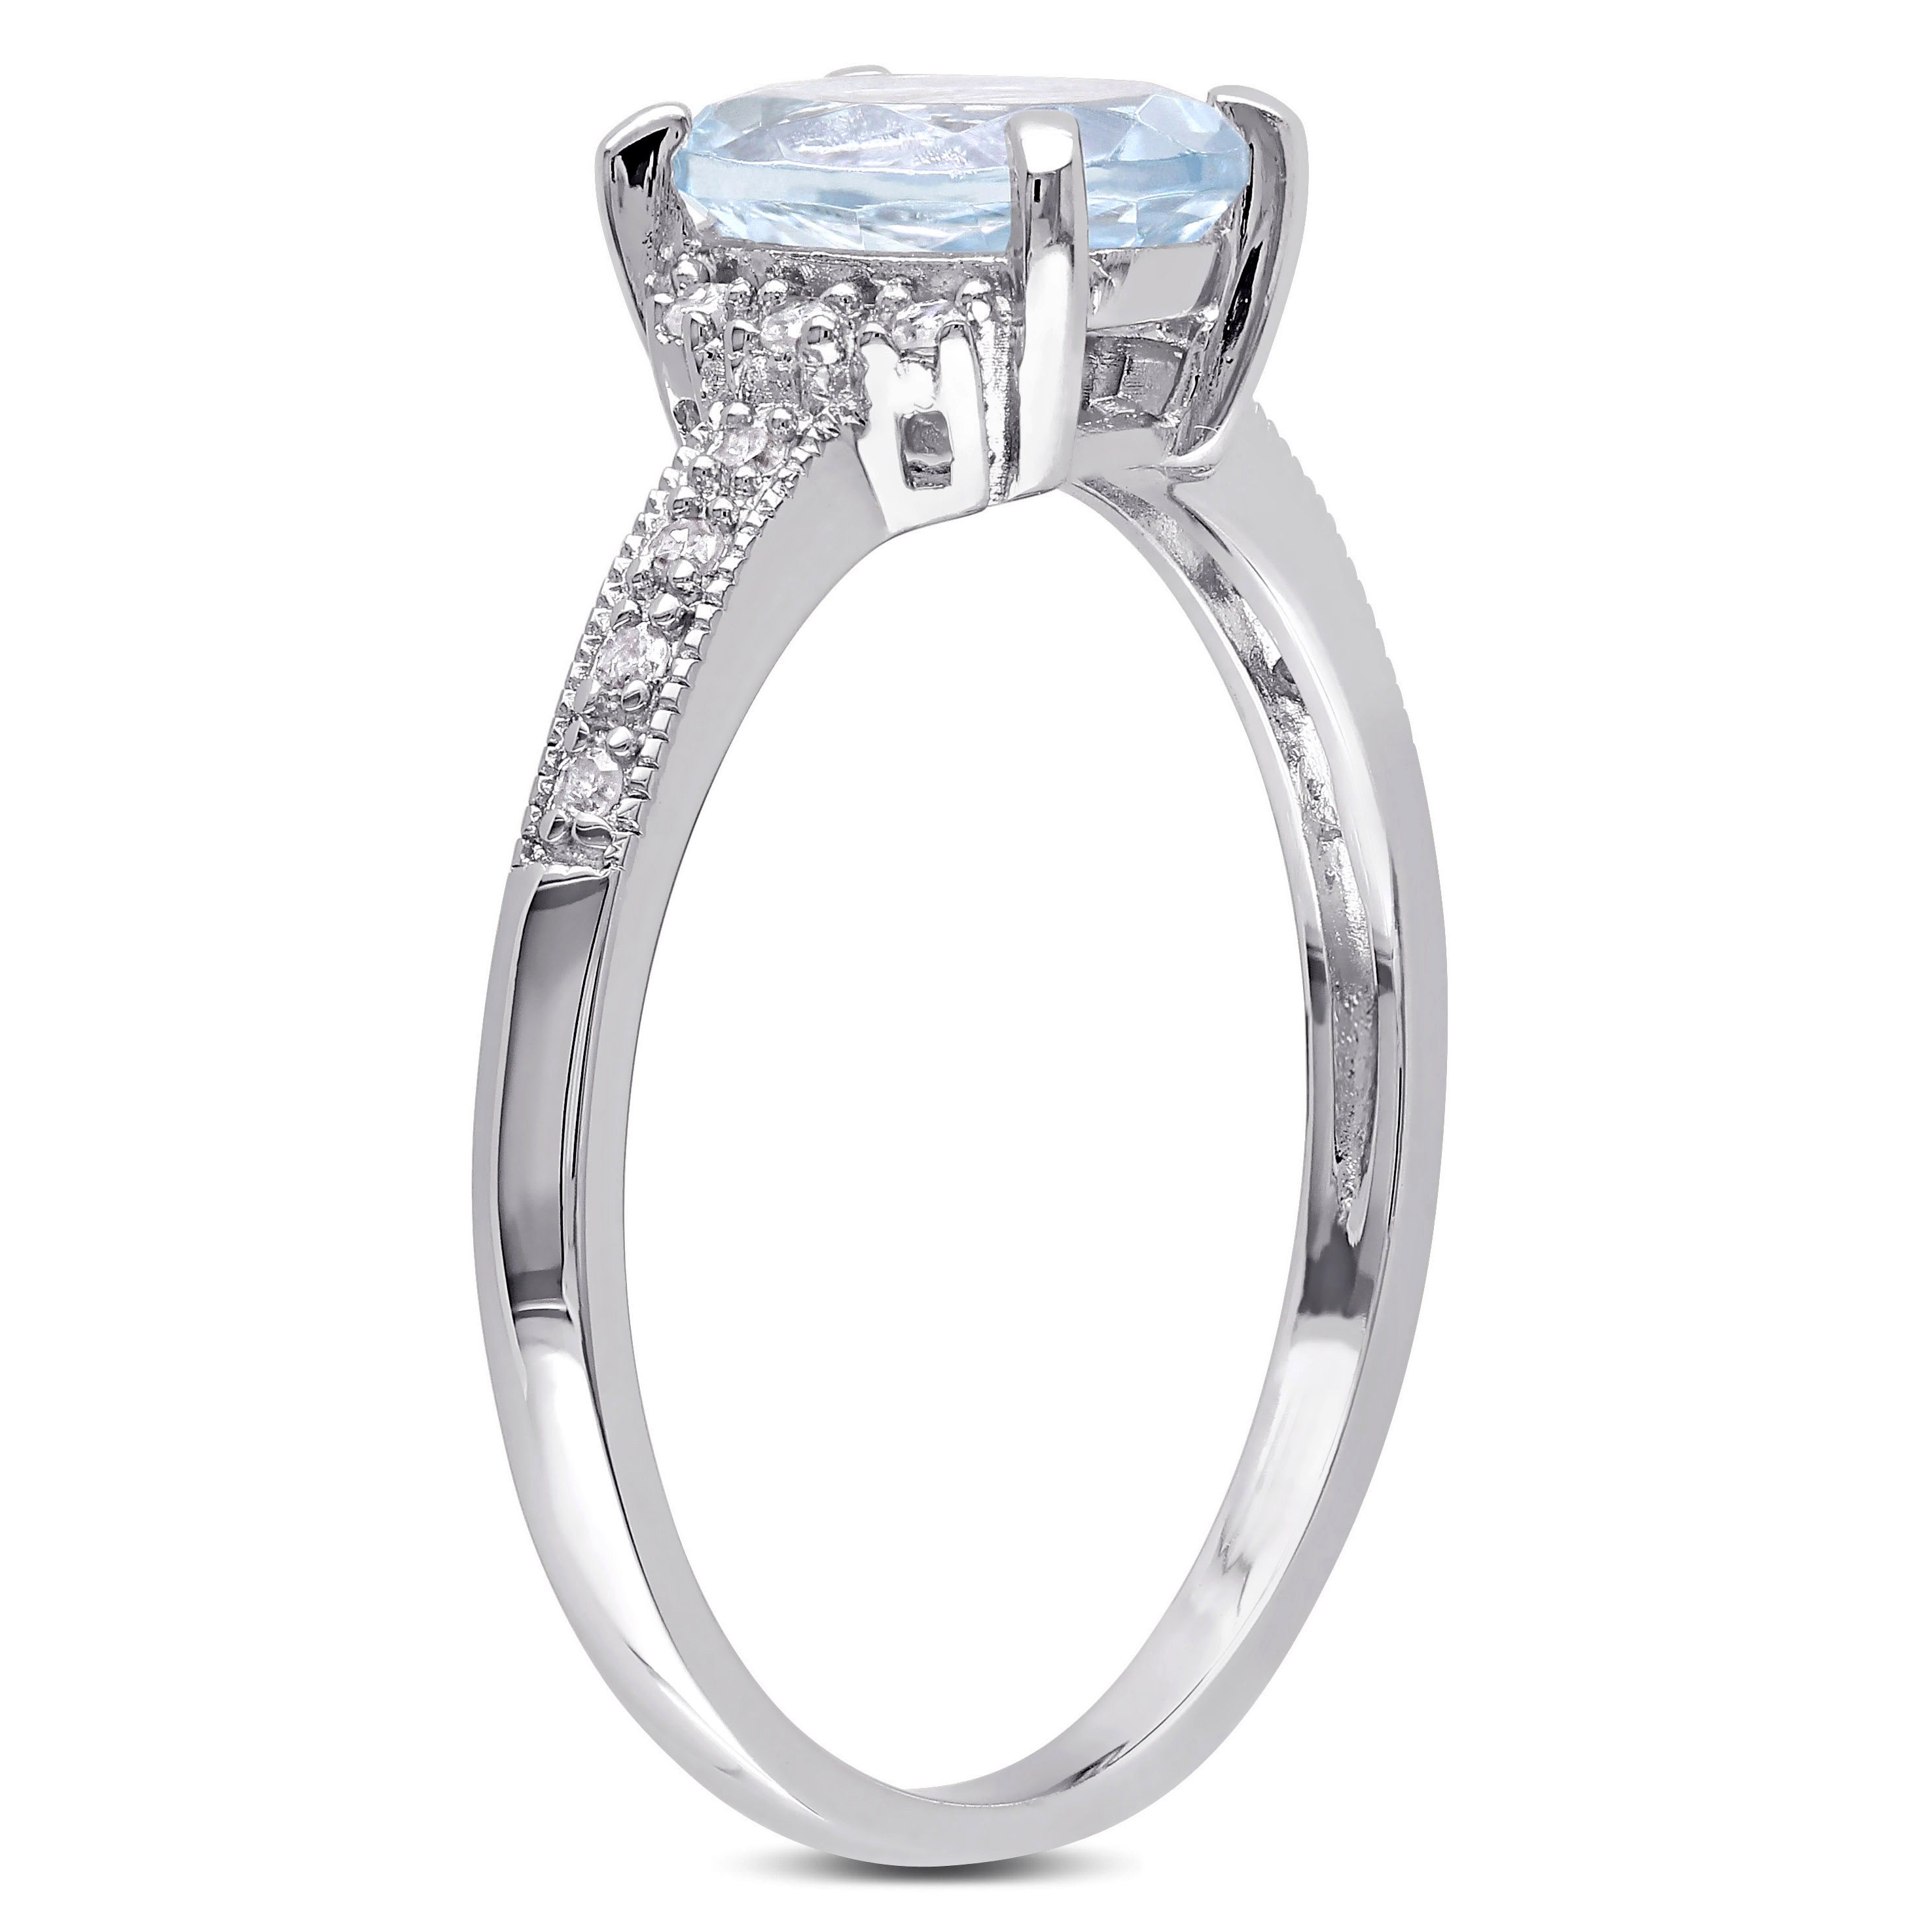 Oval Cut Aquamarine and Diamond Ring in Sterling Silver